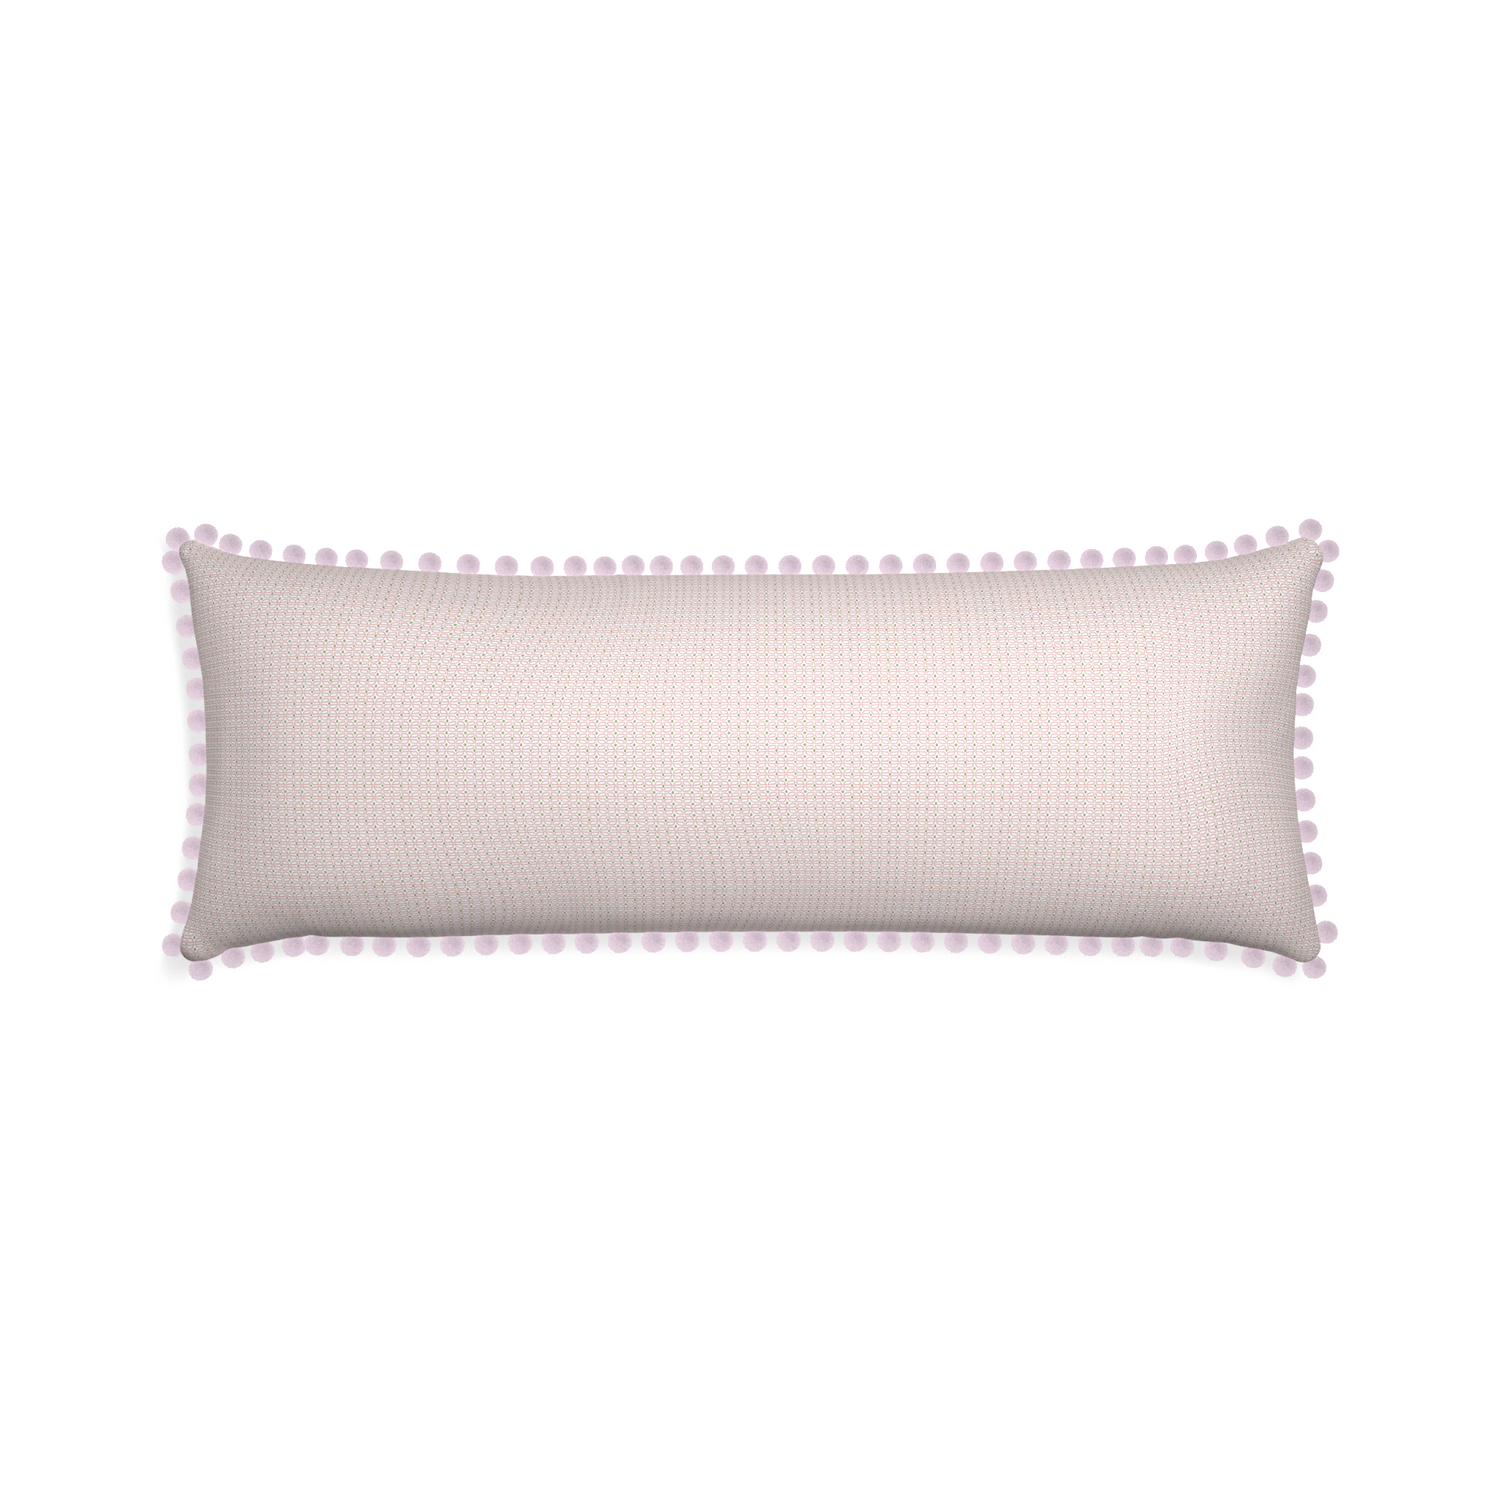 Xl-lumbar loomi pink custom pink geometricpillow with l on white background